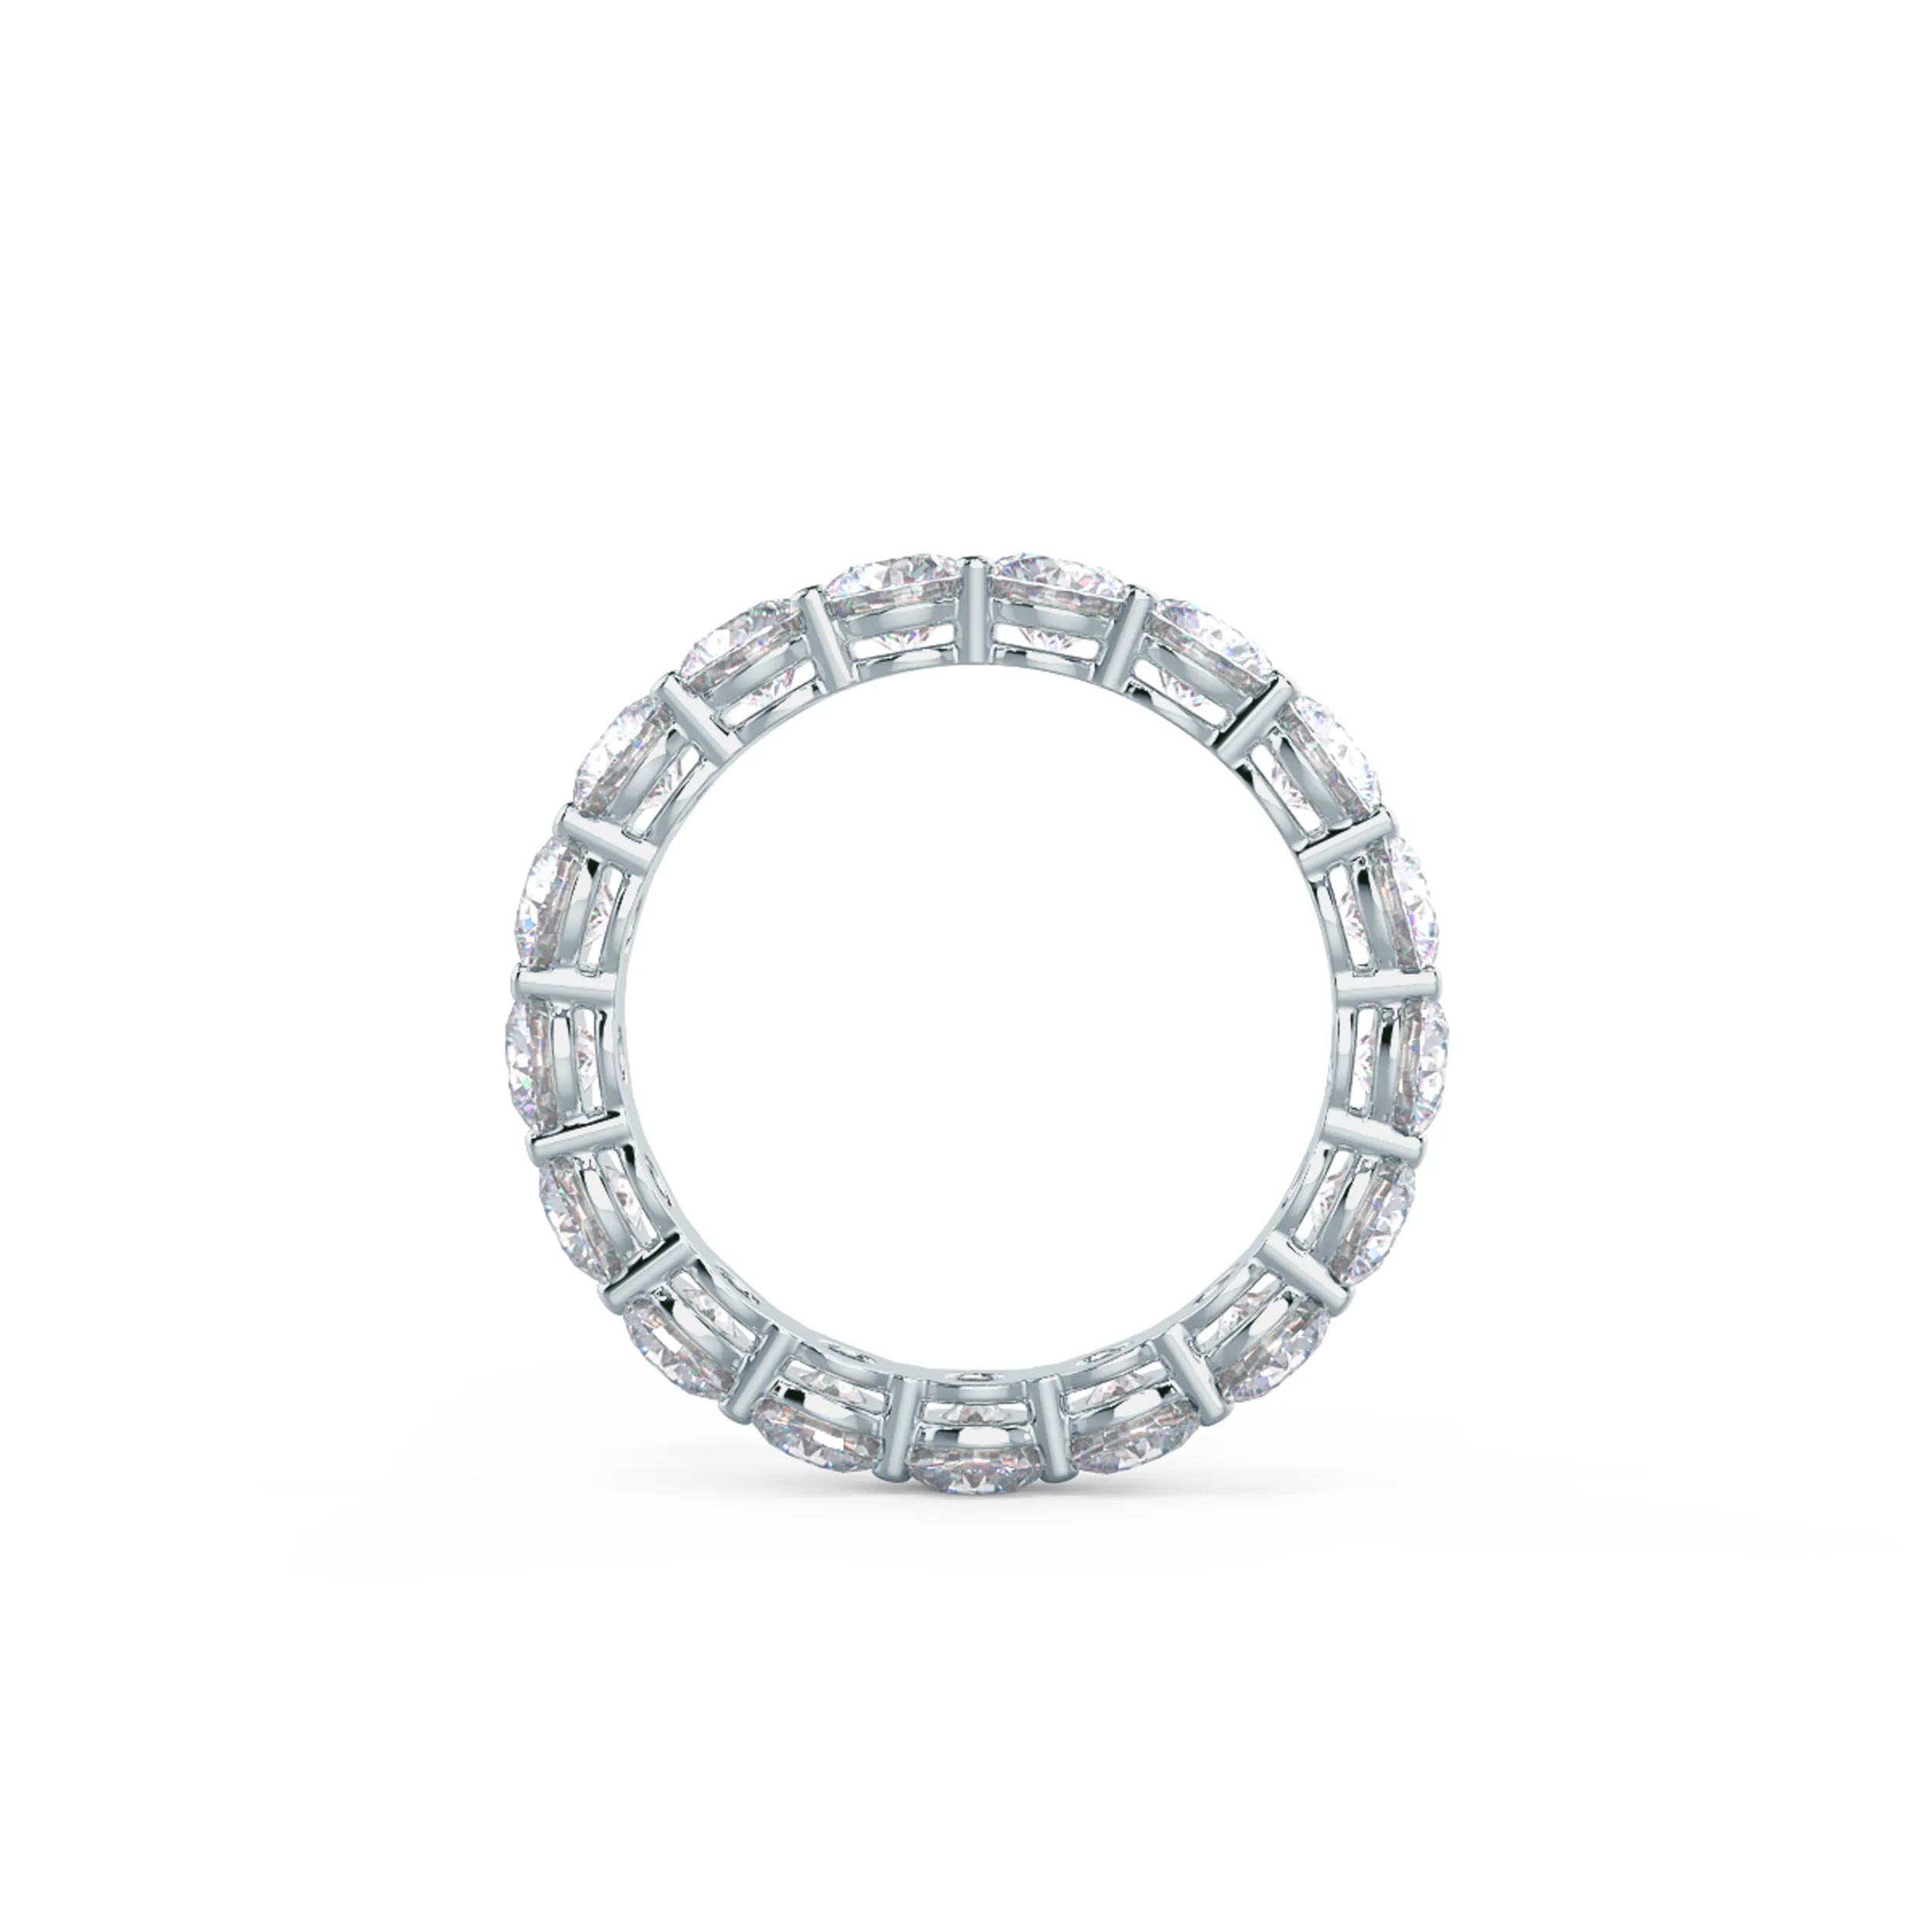 Hand Selected 3.0 Carat Round Diamonds Prong Set Eternity Band in 18k White Gold (Profile View)